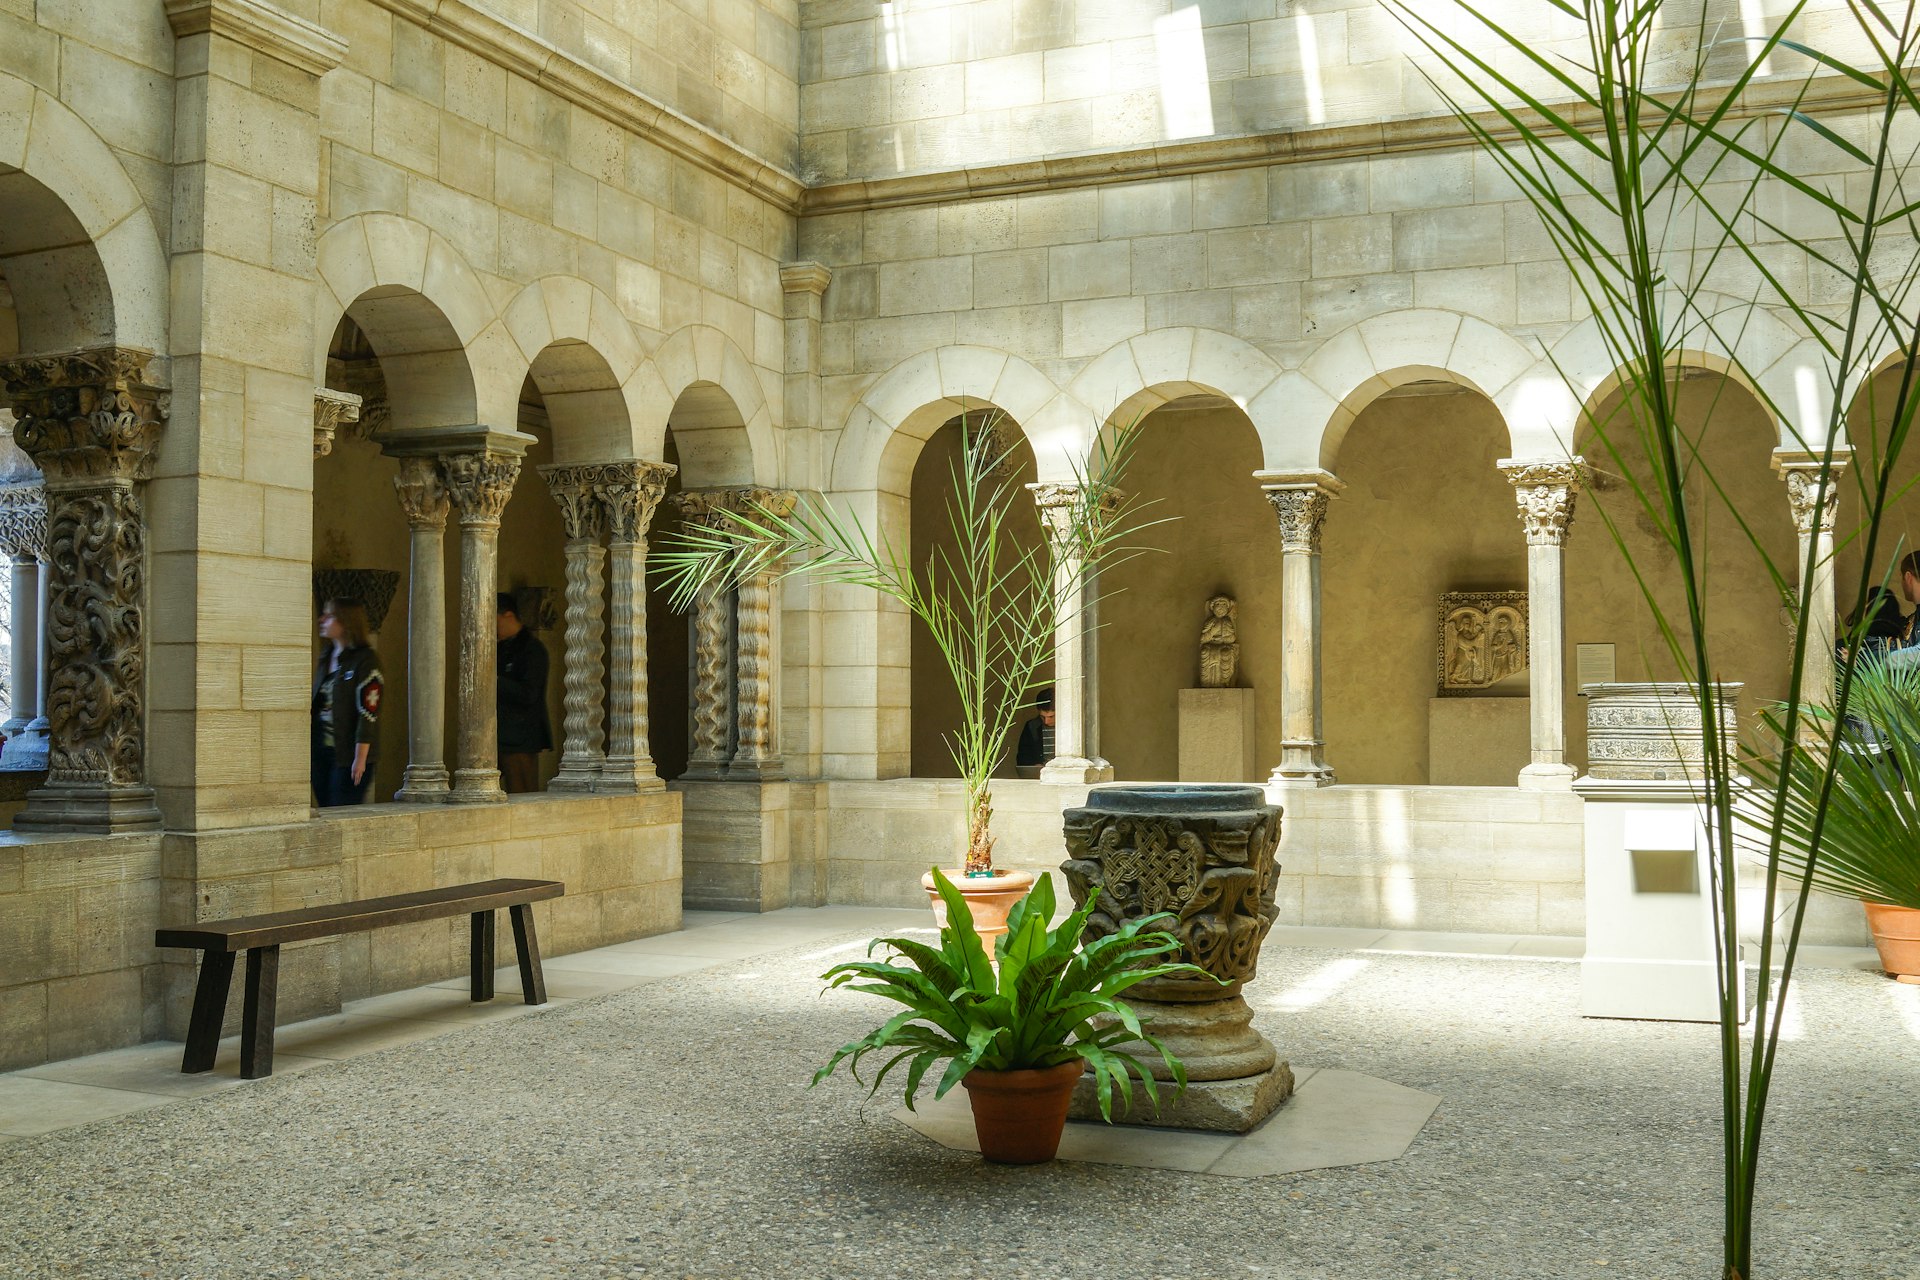 A small courtyard lined with a columned passageway